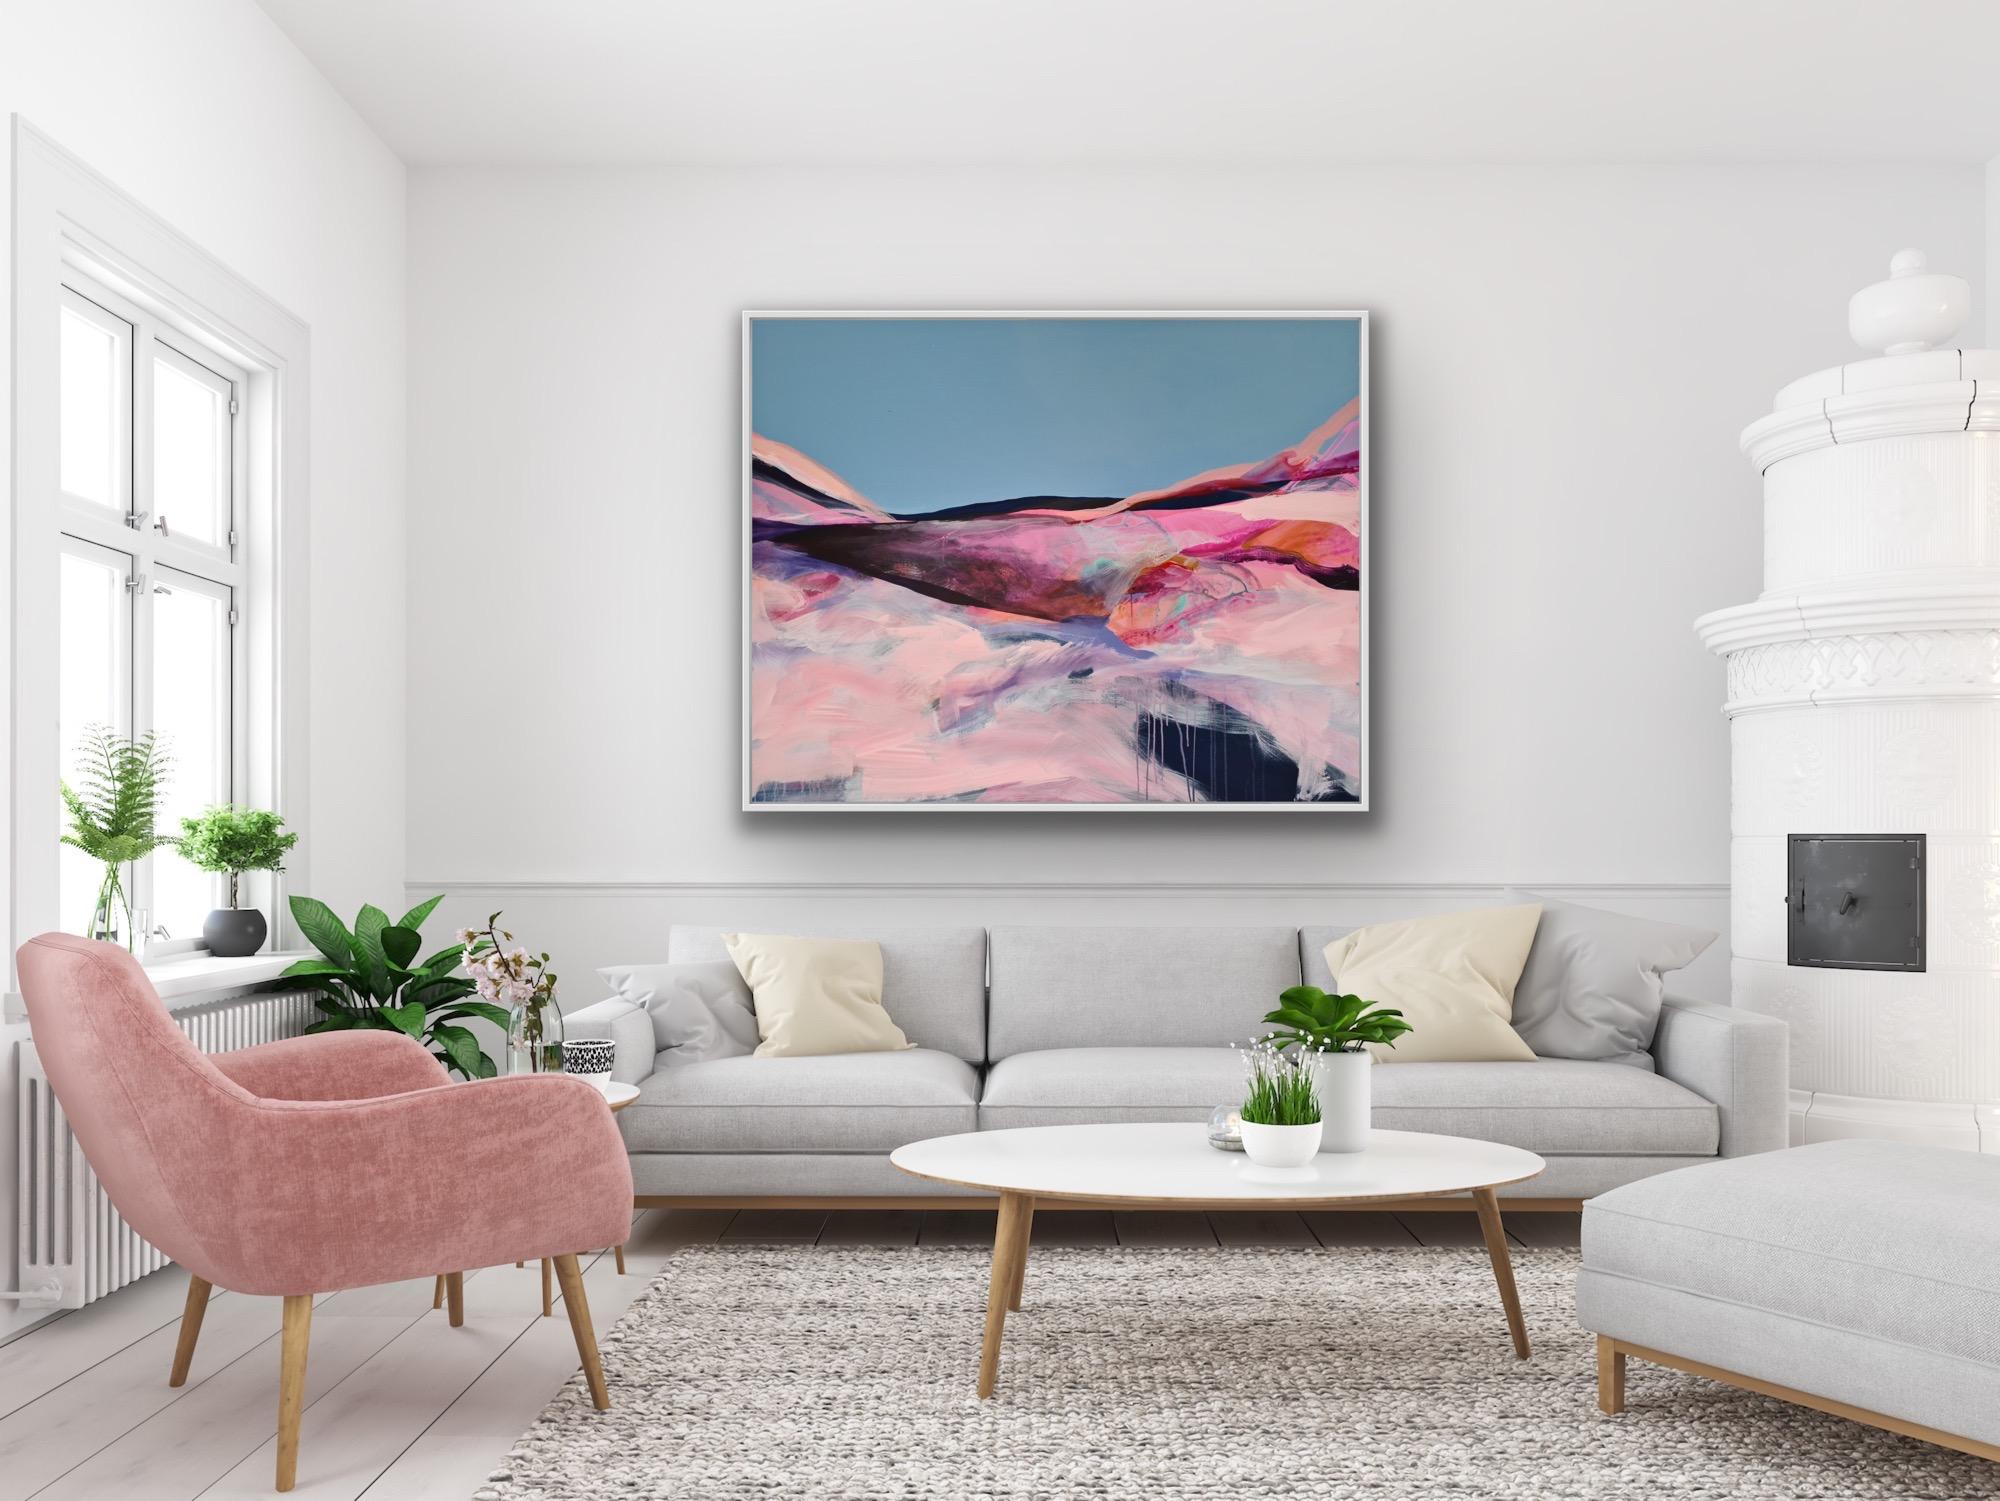 Claire Chandler
Dreamscape
Original Abstract Painting on Canvas
Image Size: H 127cm x W 157cm
Sold Unframed
(Please note that in situ images are purely an indication of how a piece may look).
